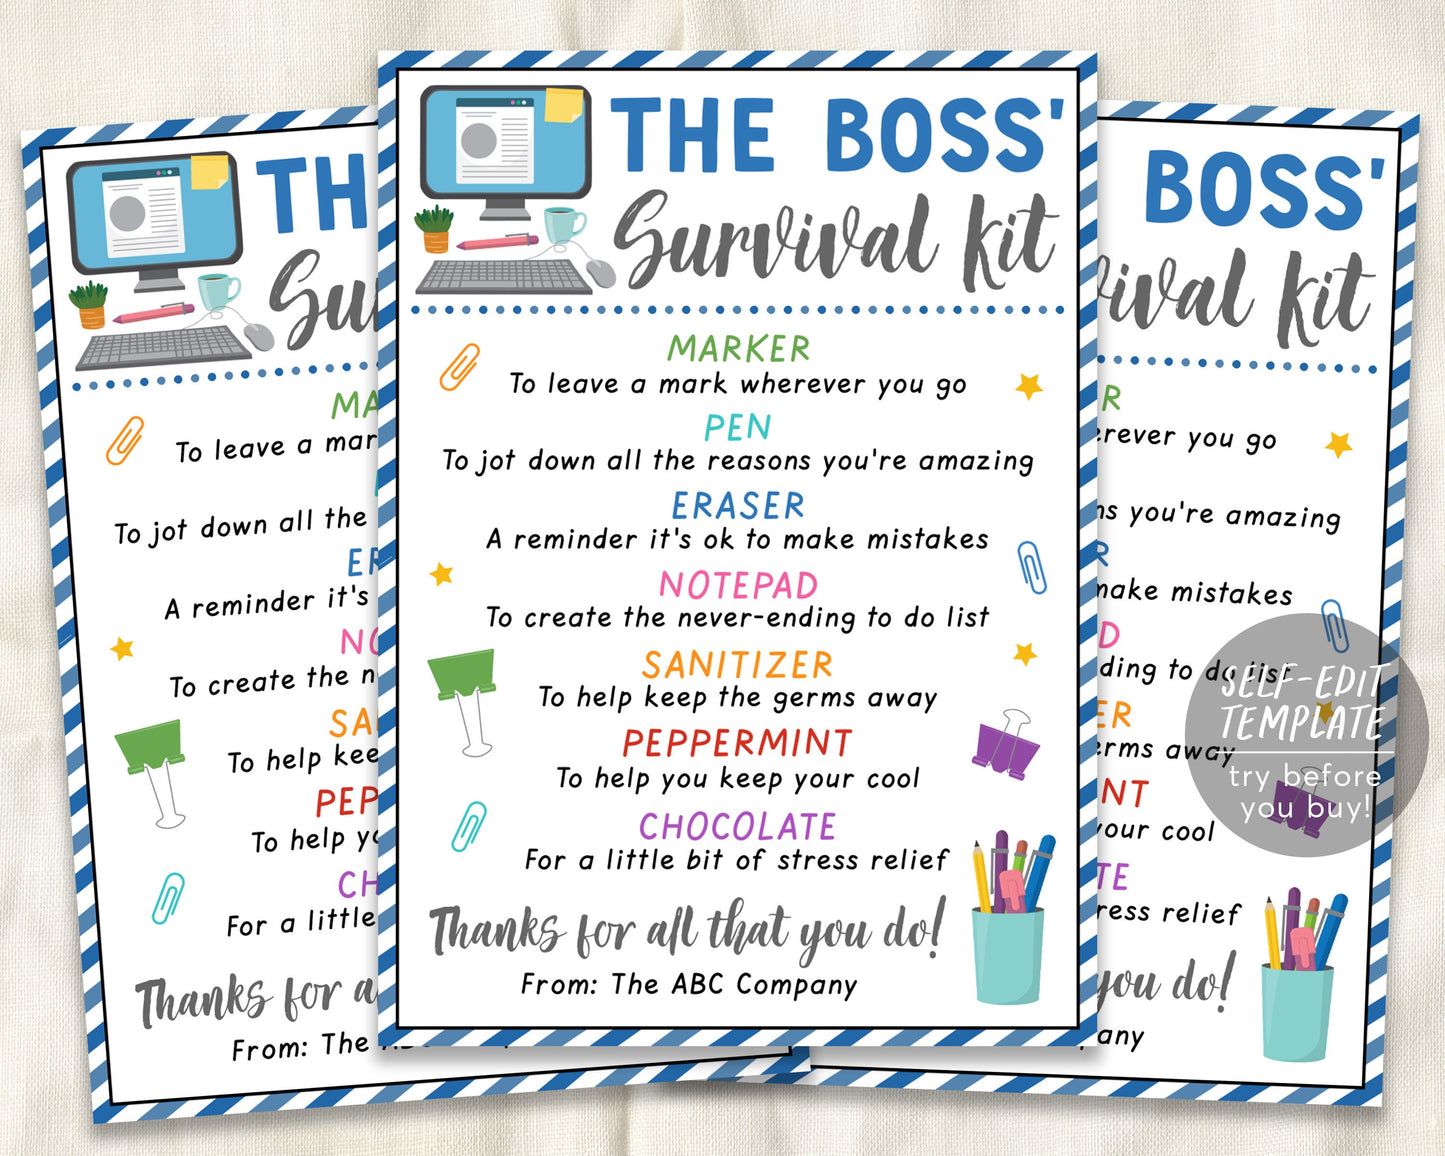 Boss Survival Kit Gift Tags Editable Template, Boss Appreciation Day, Manager Admin HR Office Gifts Ideas, Corporate Professional's Day